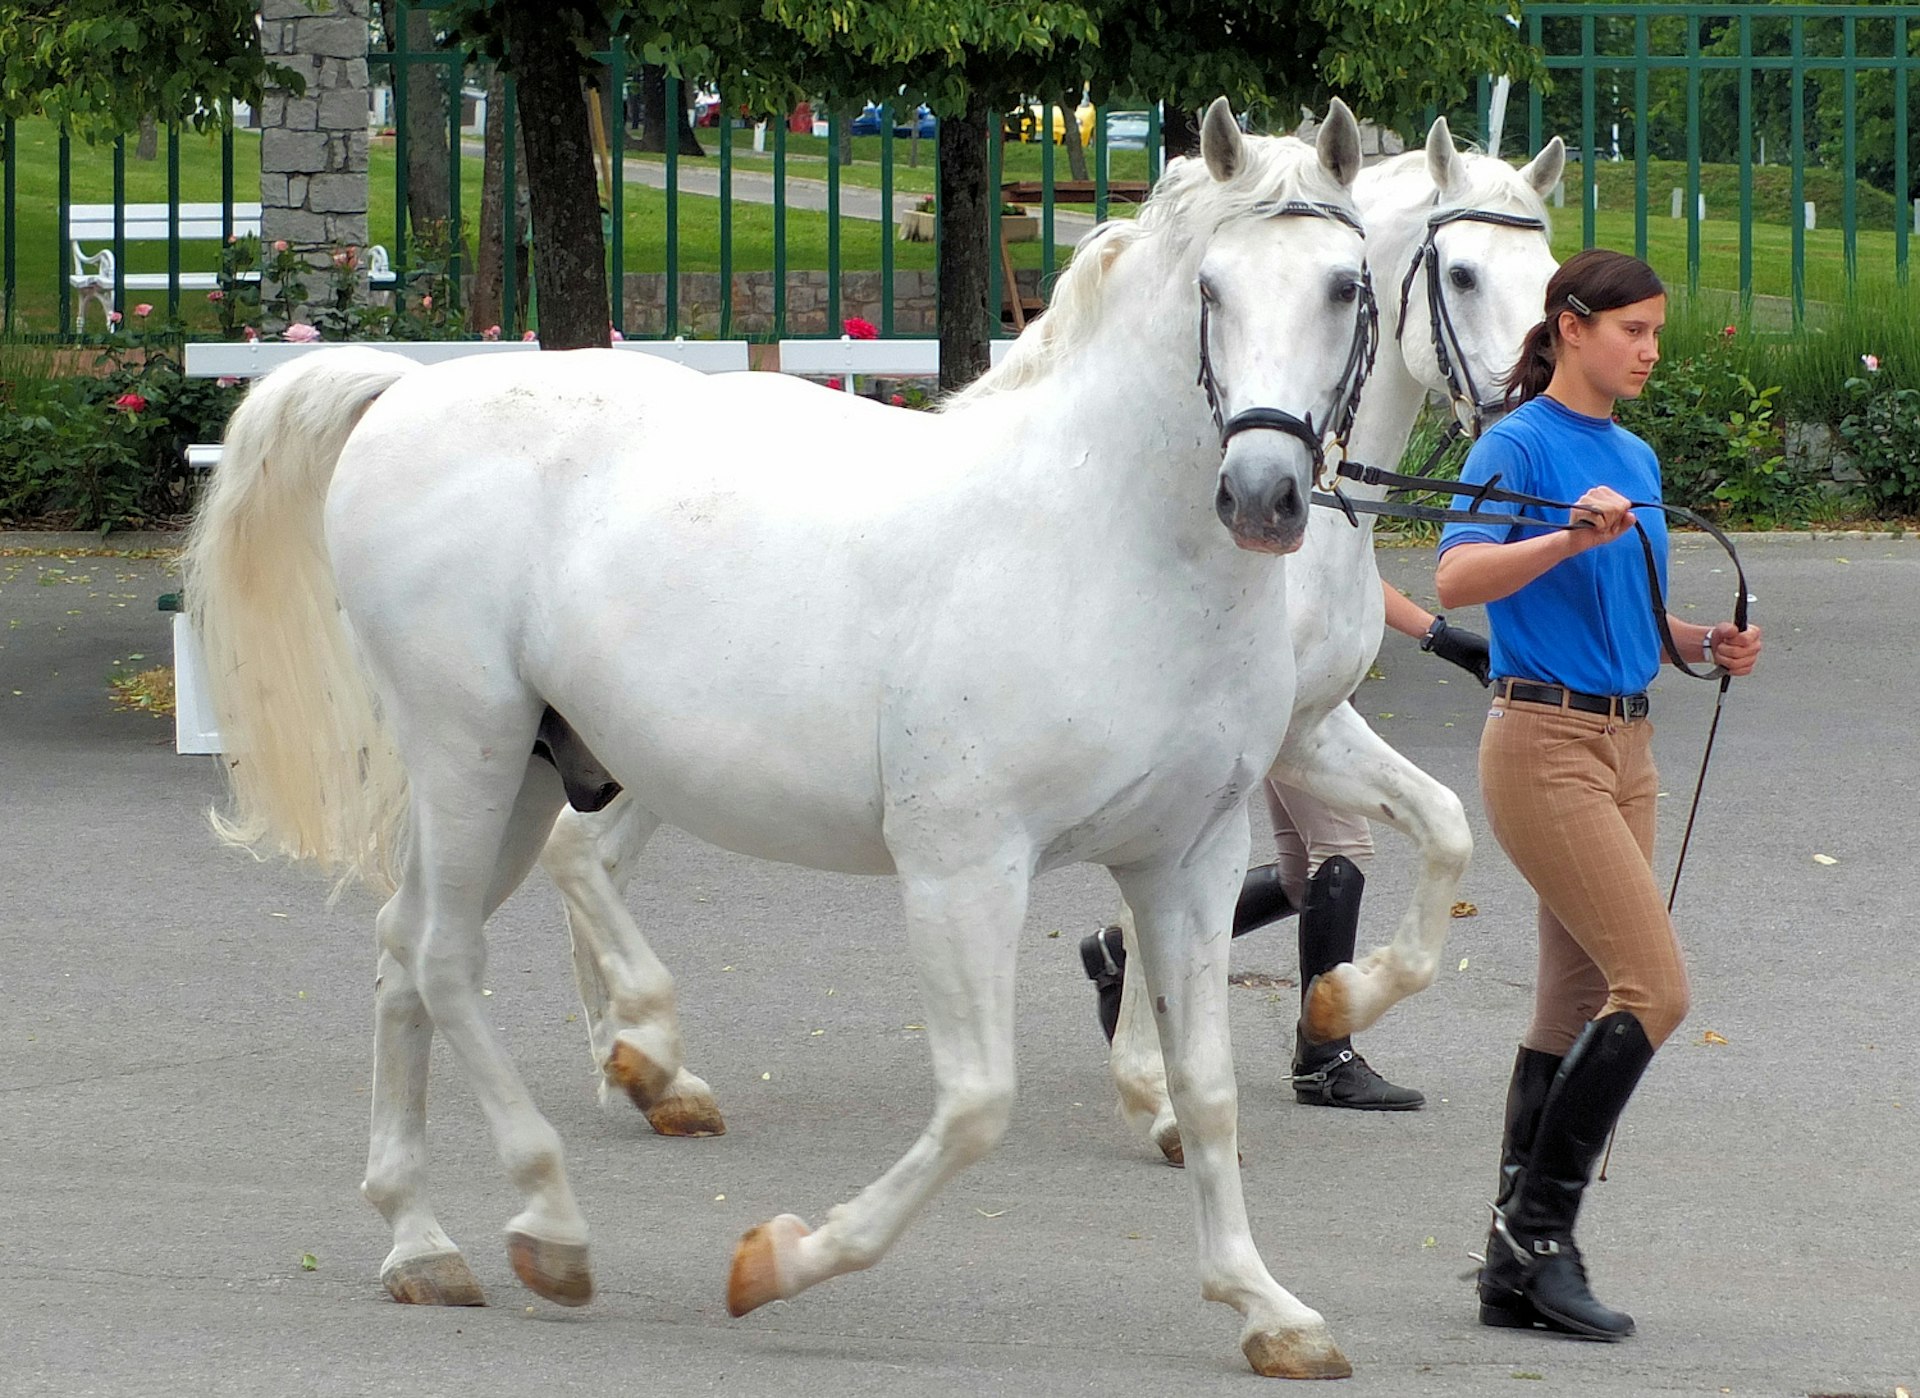 White stallions at Lipica Stud Farm. Image by Keith Roper / CC BY 2.0